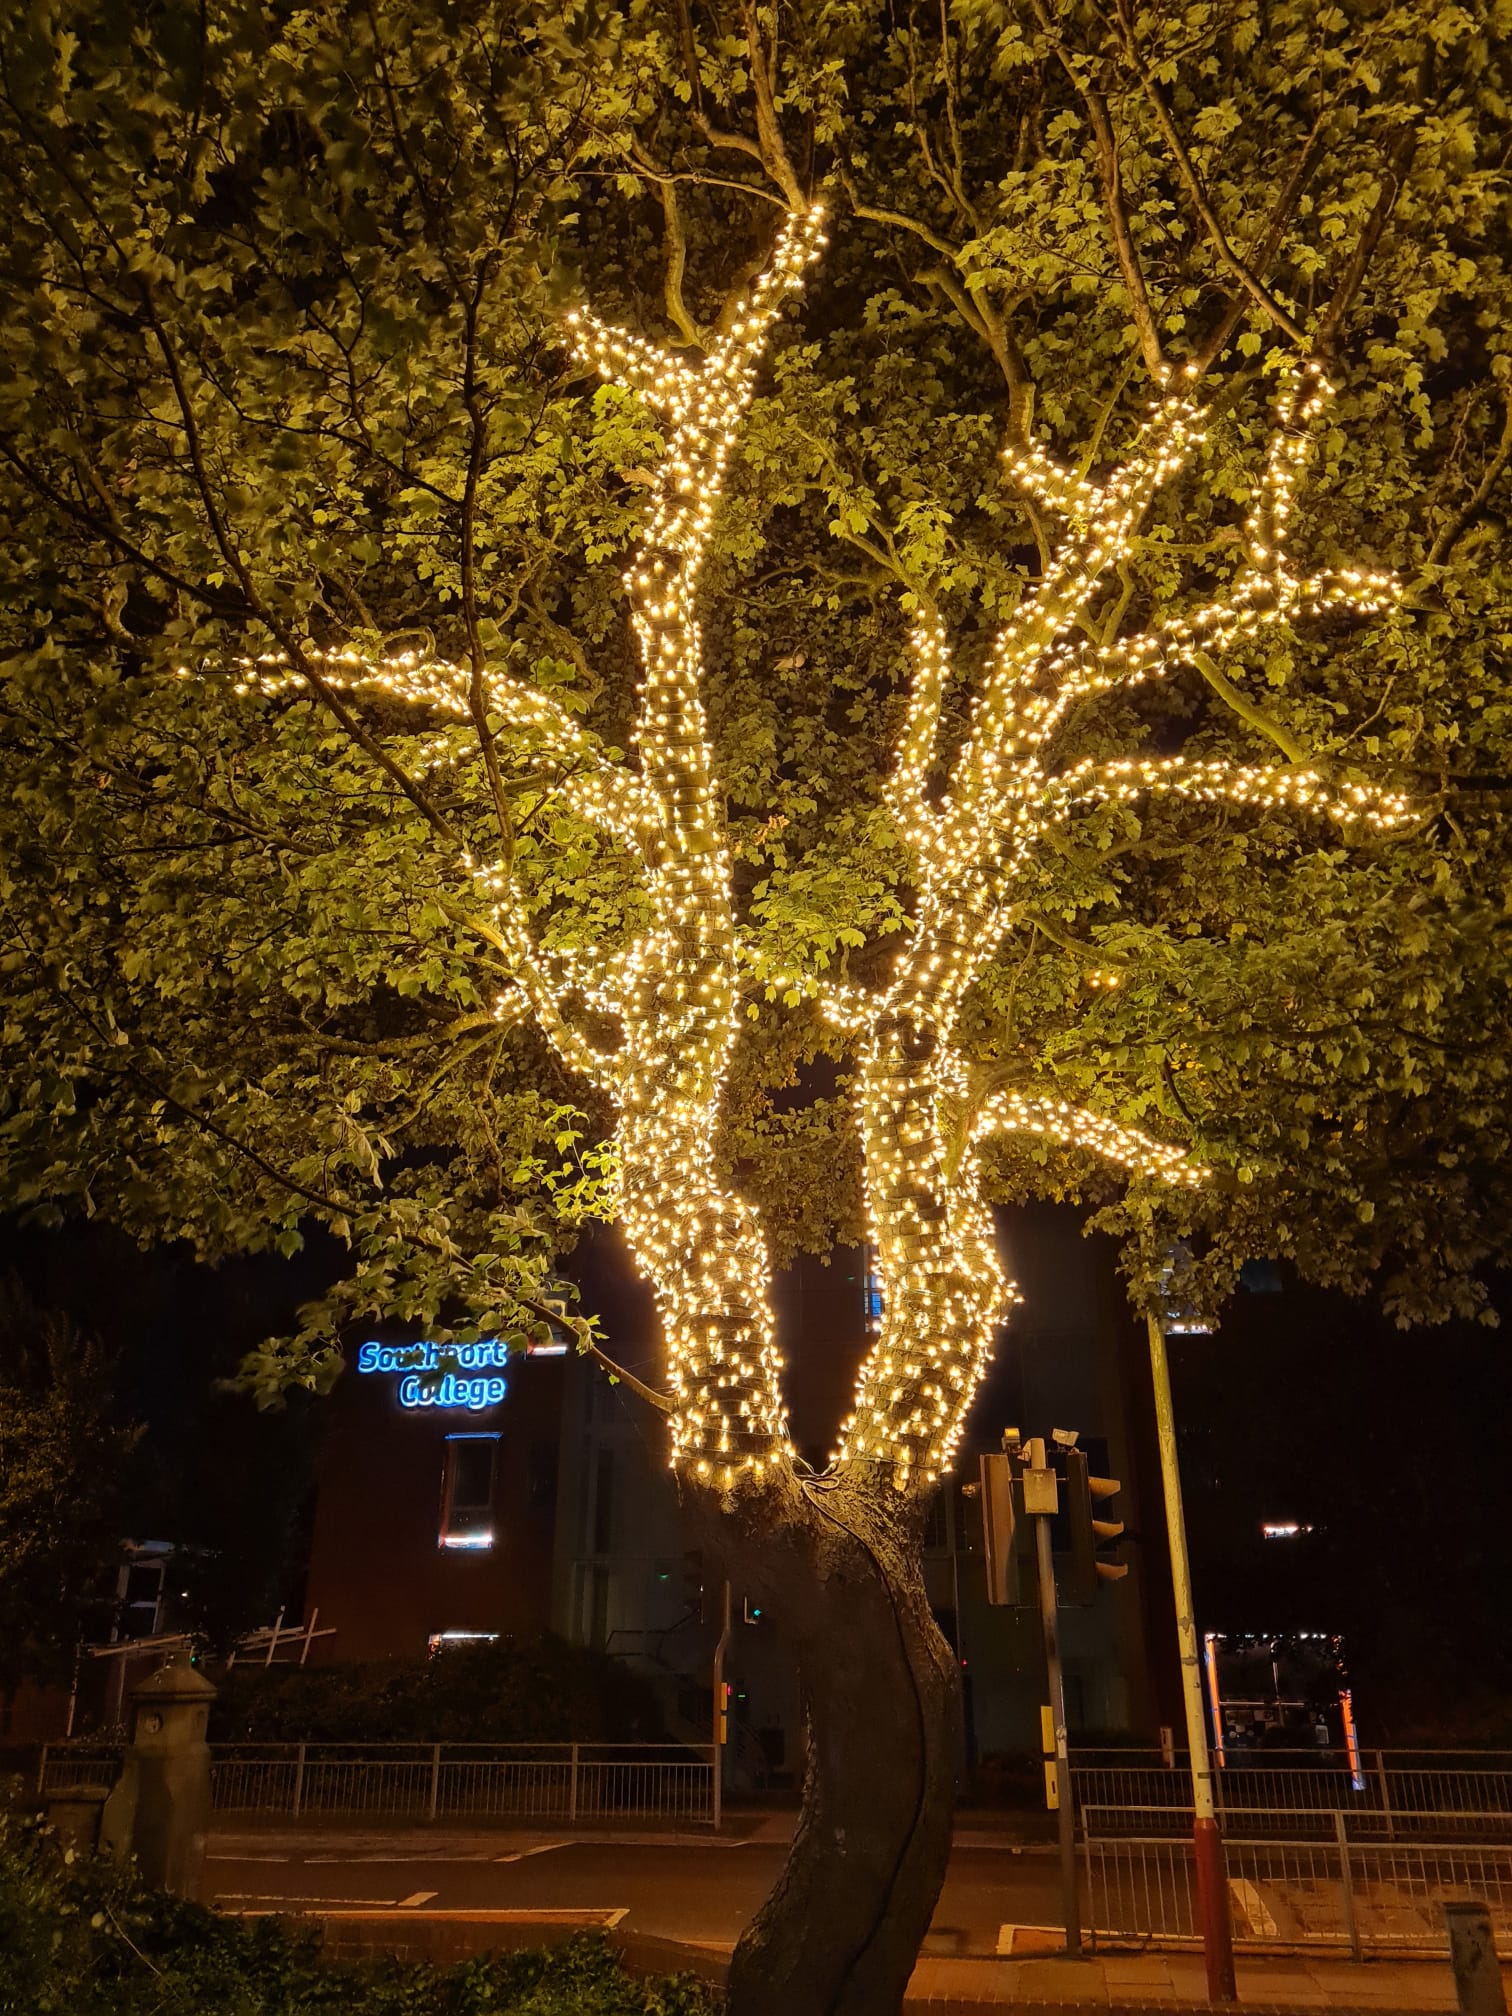 A tree outside Southport College has been lit up by local lighting firm IllumiDex UK Ltd